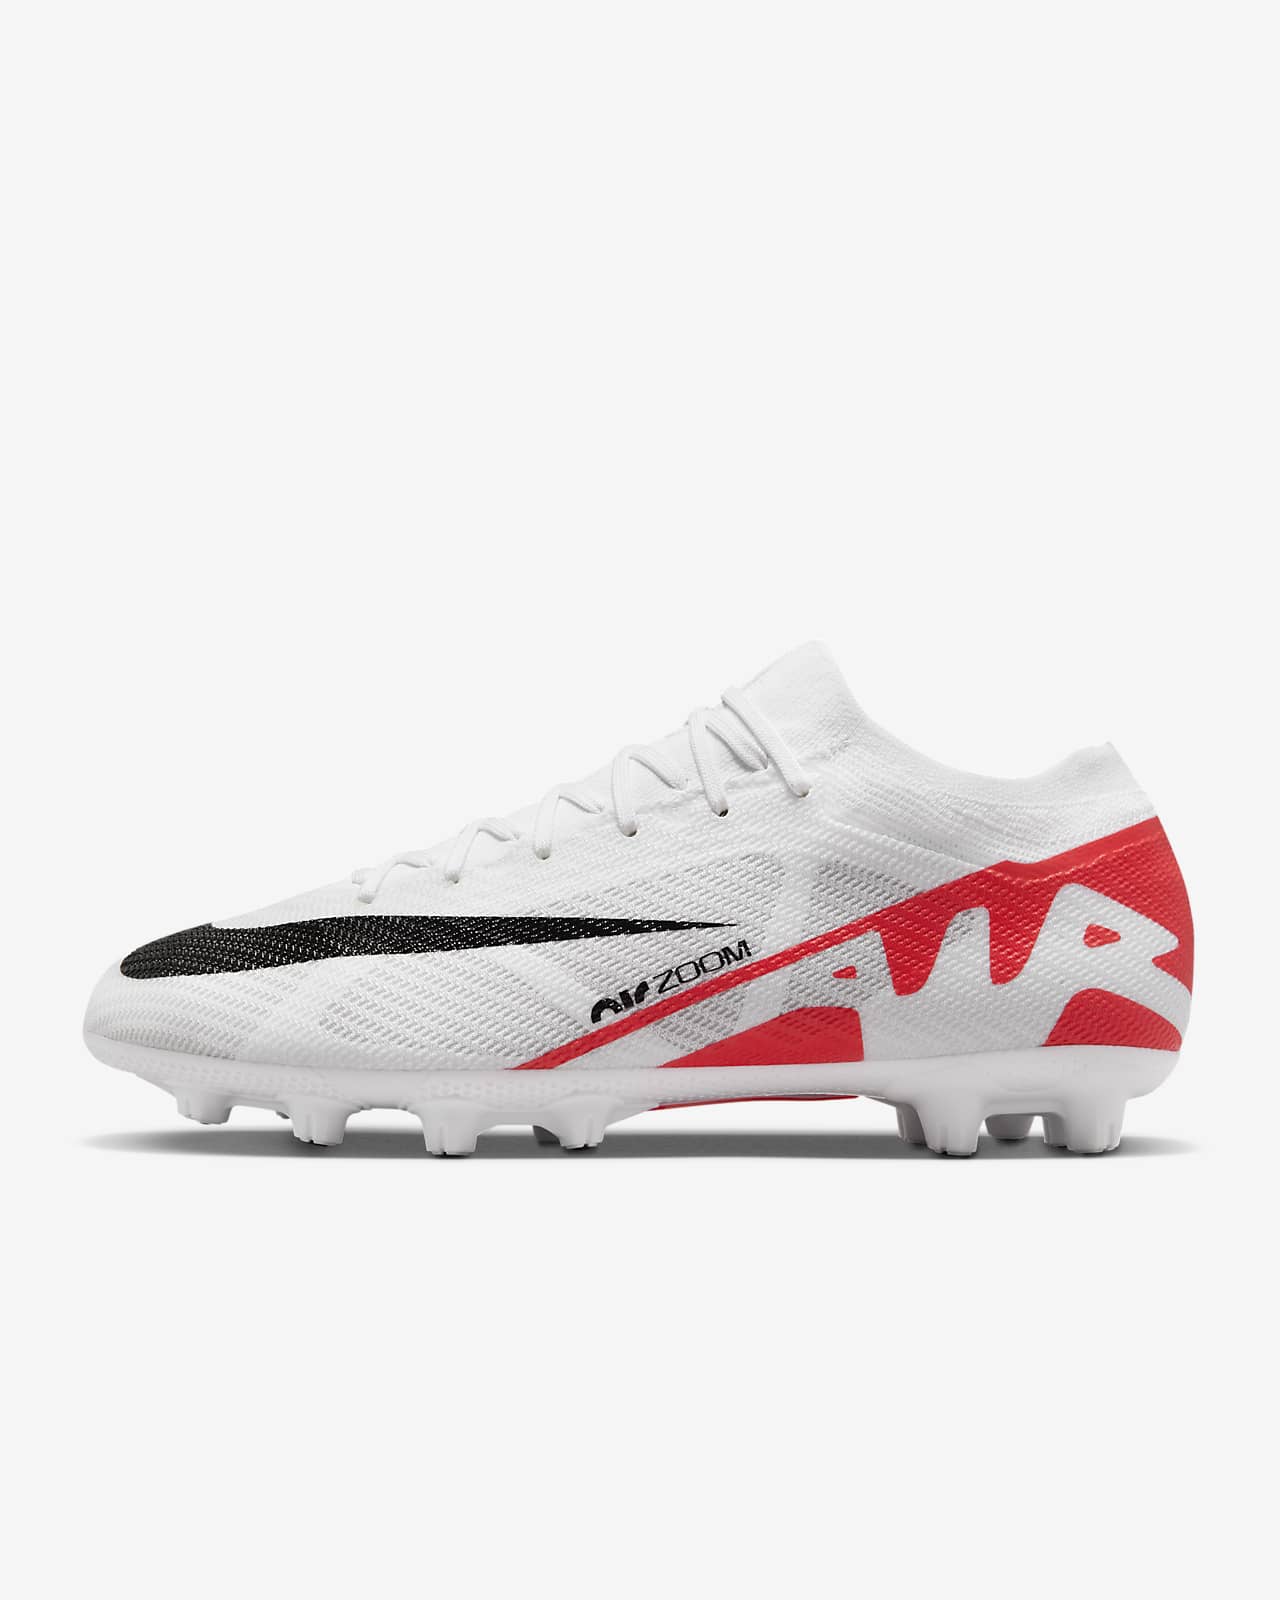 Nike Mercurial Vapor 15 Pro Hard-Ground Low-Top Soccer Cleat